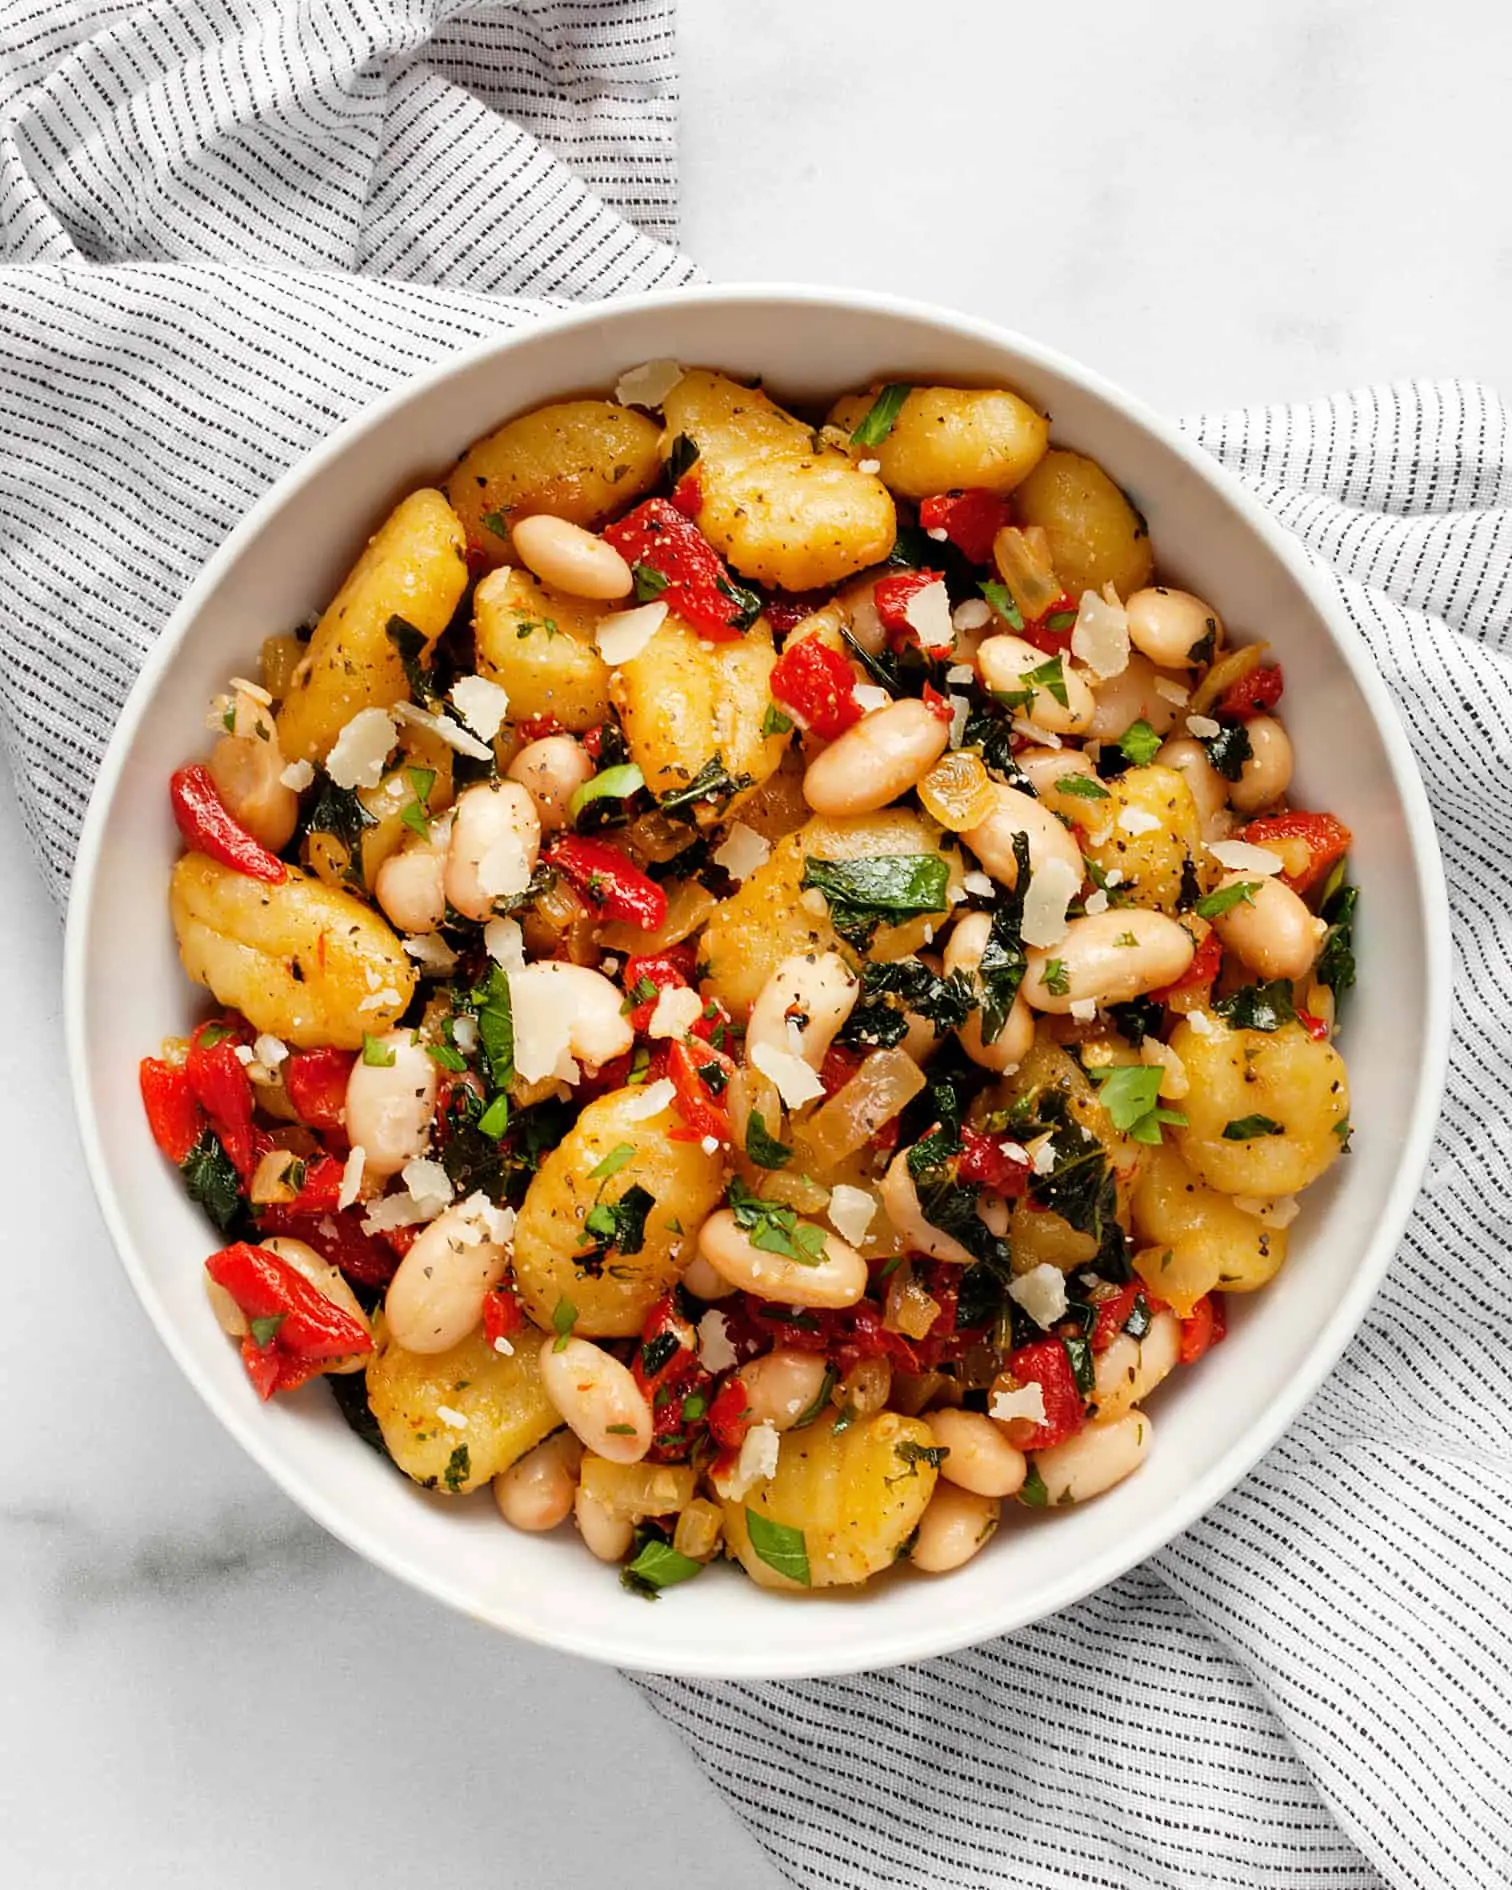 Gnocchi with red peppers and white beans